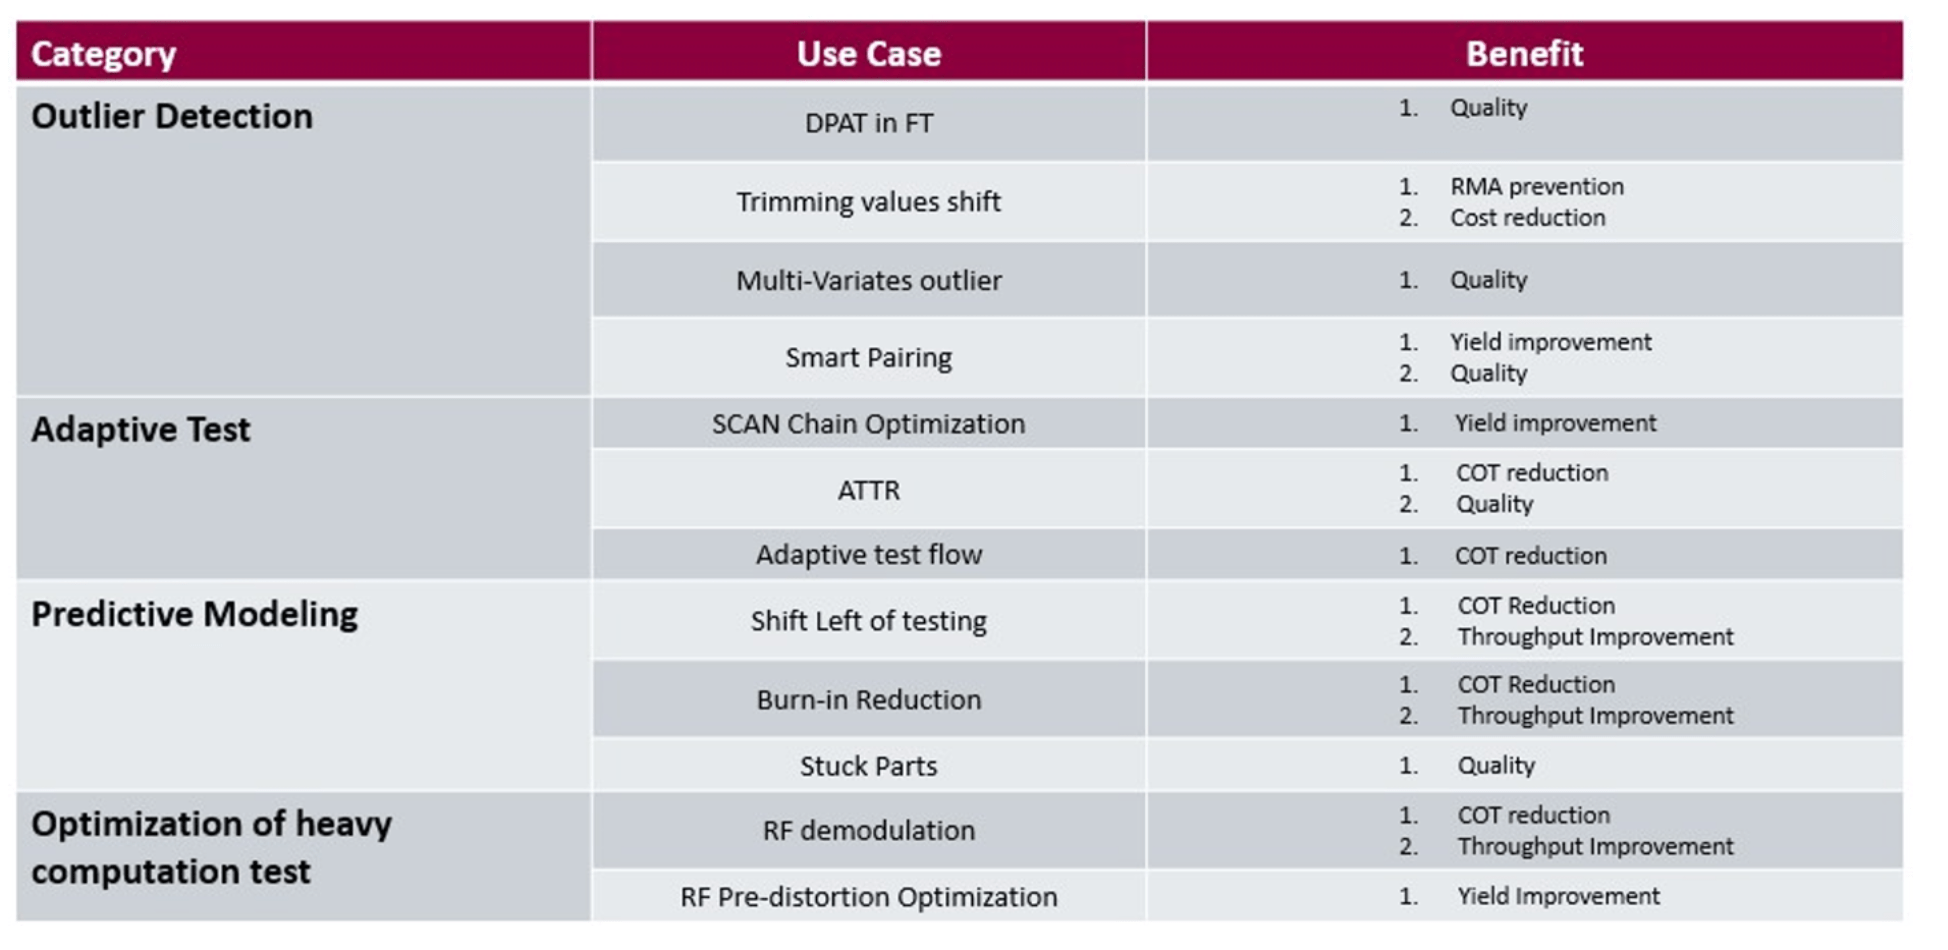 Fig. 1: Advantest Control Solutions use cases enable quality and yield improvement, preventing field failures, and reducing the cost of test (COT). Source: Advantest